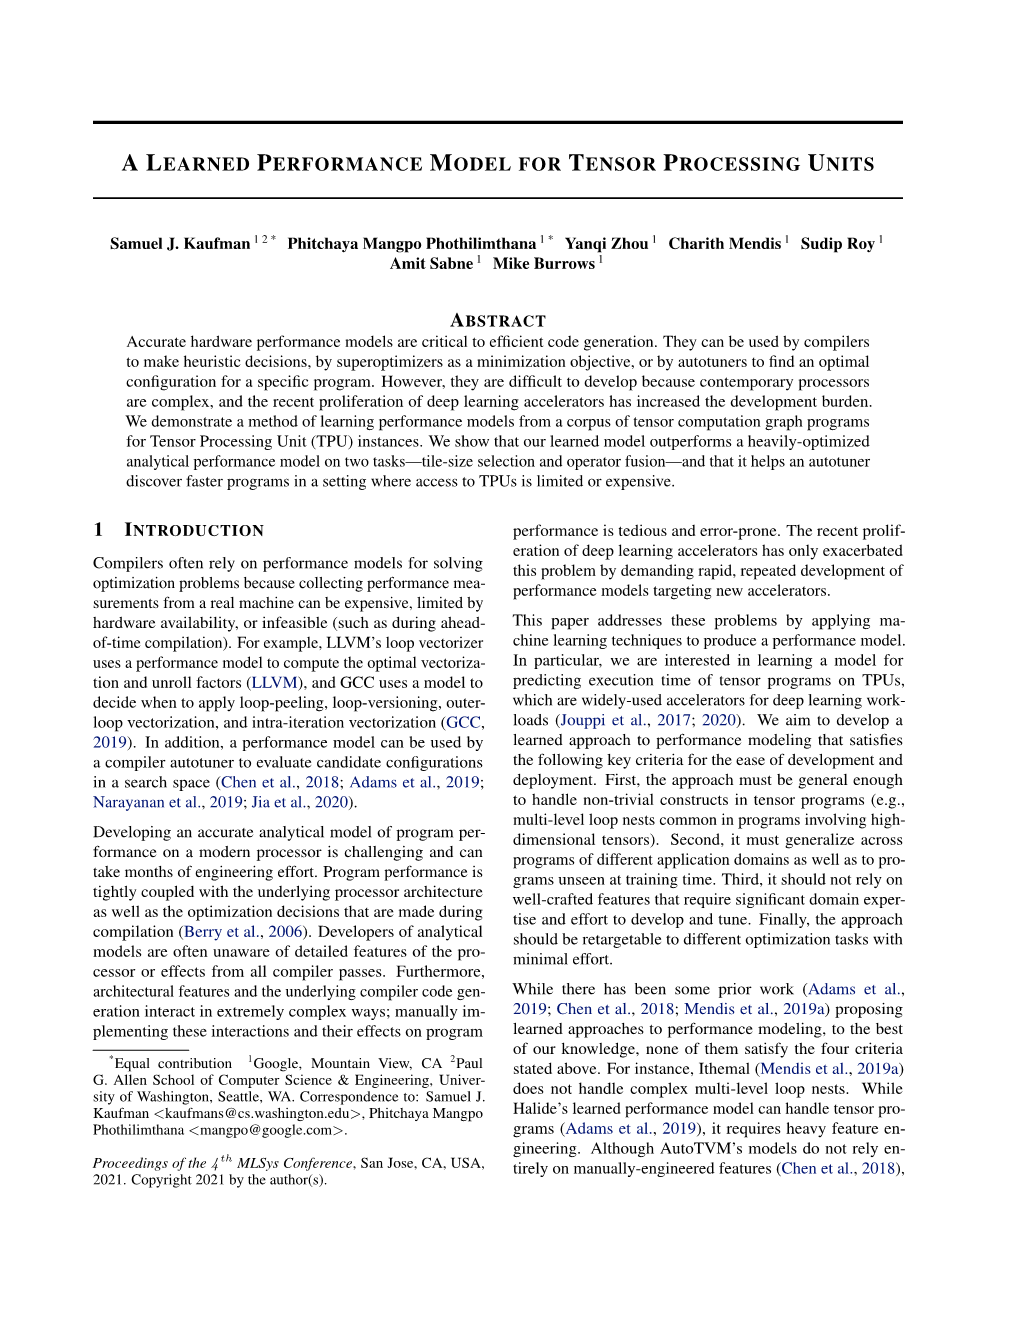 A Learned Performance Model for Tensor Processing Units